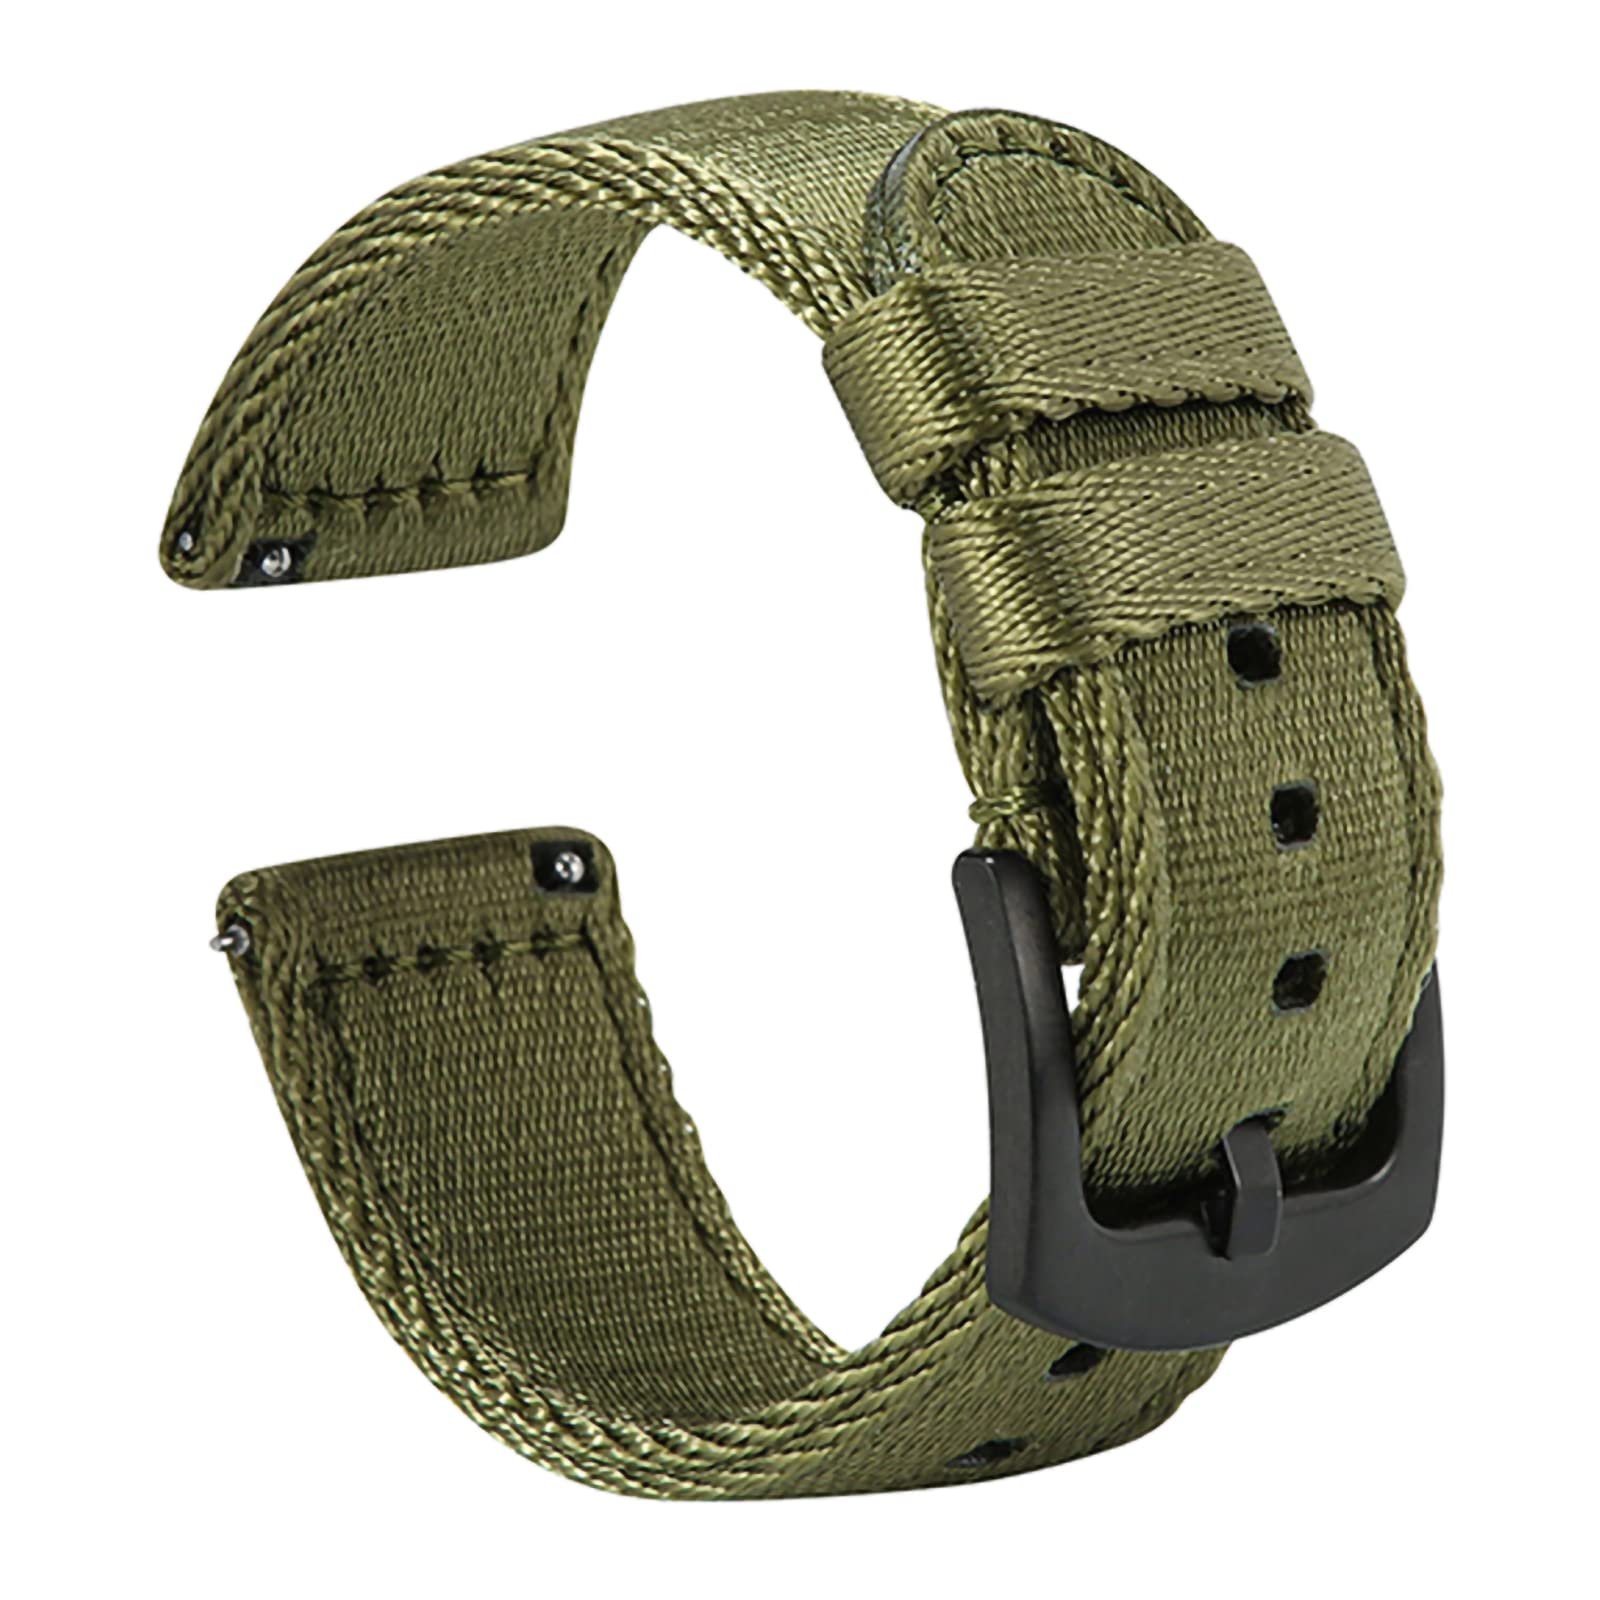 WOUKUP Military Quick Release Nylon Watch Bands Premium Seat Belt Material Watch Strap 18mm 20mm 22mm Watchband for Men and Women